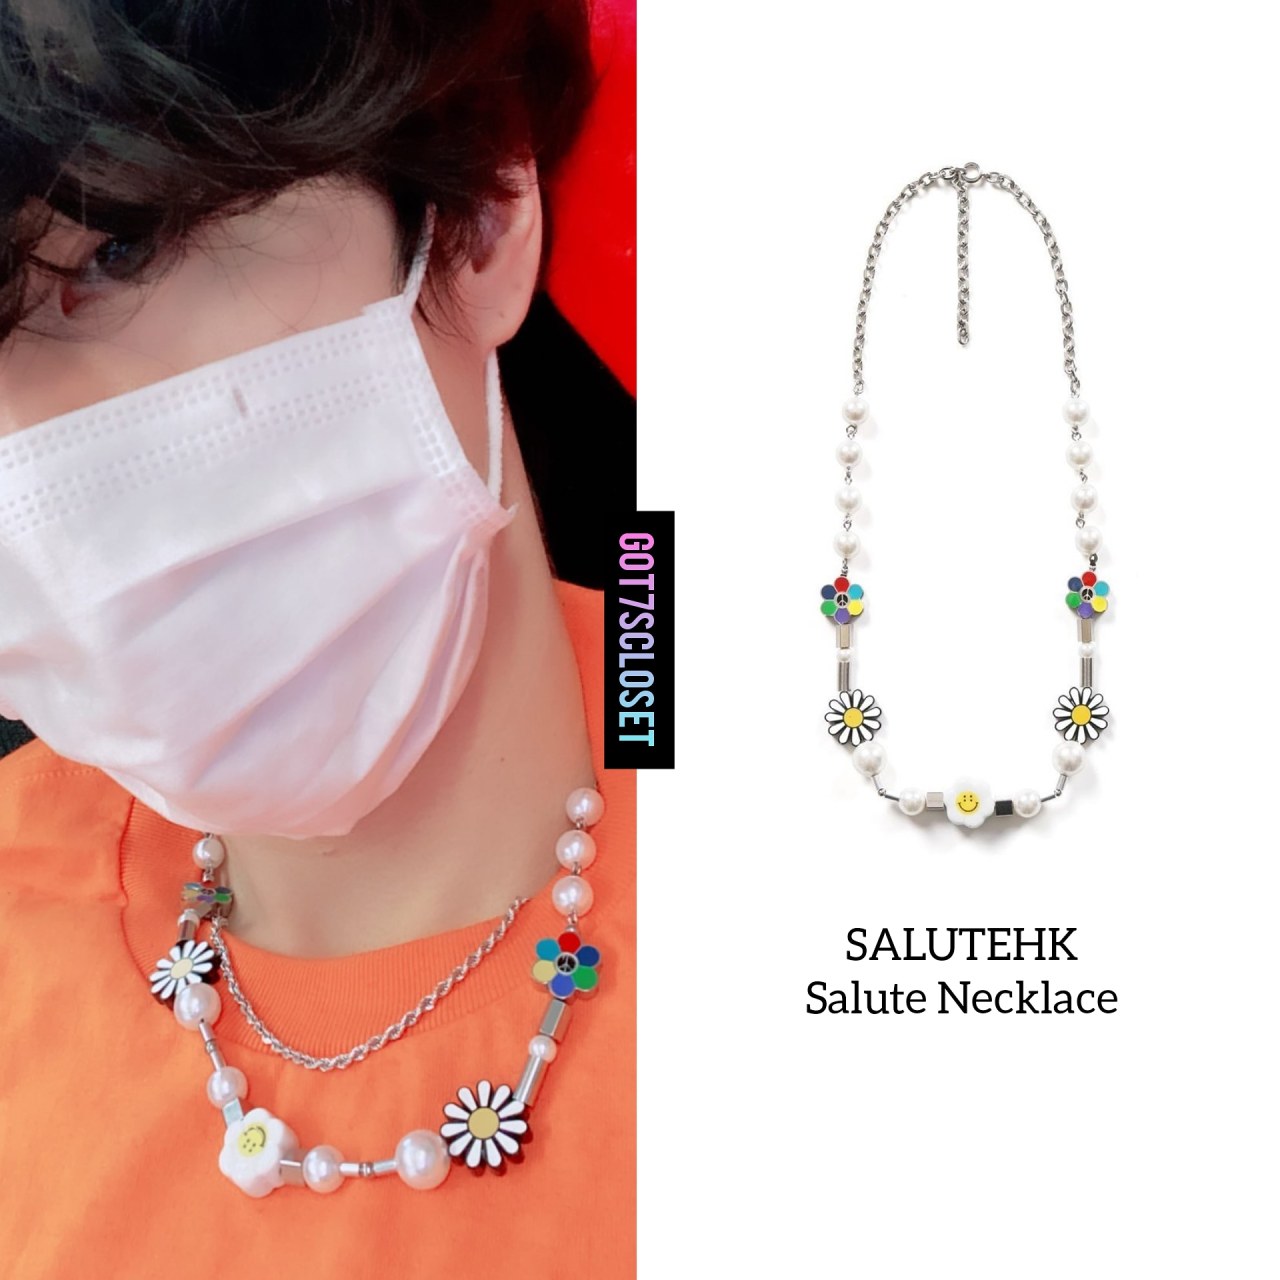 MARK TUAN STYLE on X: ╔ #MARKtuanstyle ╗MONOGRAM CHARMS NECKLACE $422.30  USD ,, cr. @aciddrop0904 ,, #GOT7 #갓세븐 #마크 #Mark #Marktuan #streetstyle  #streetfashion  / X